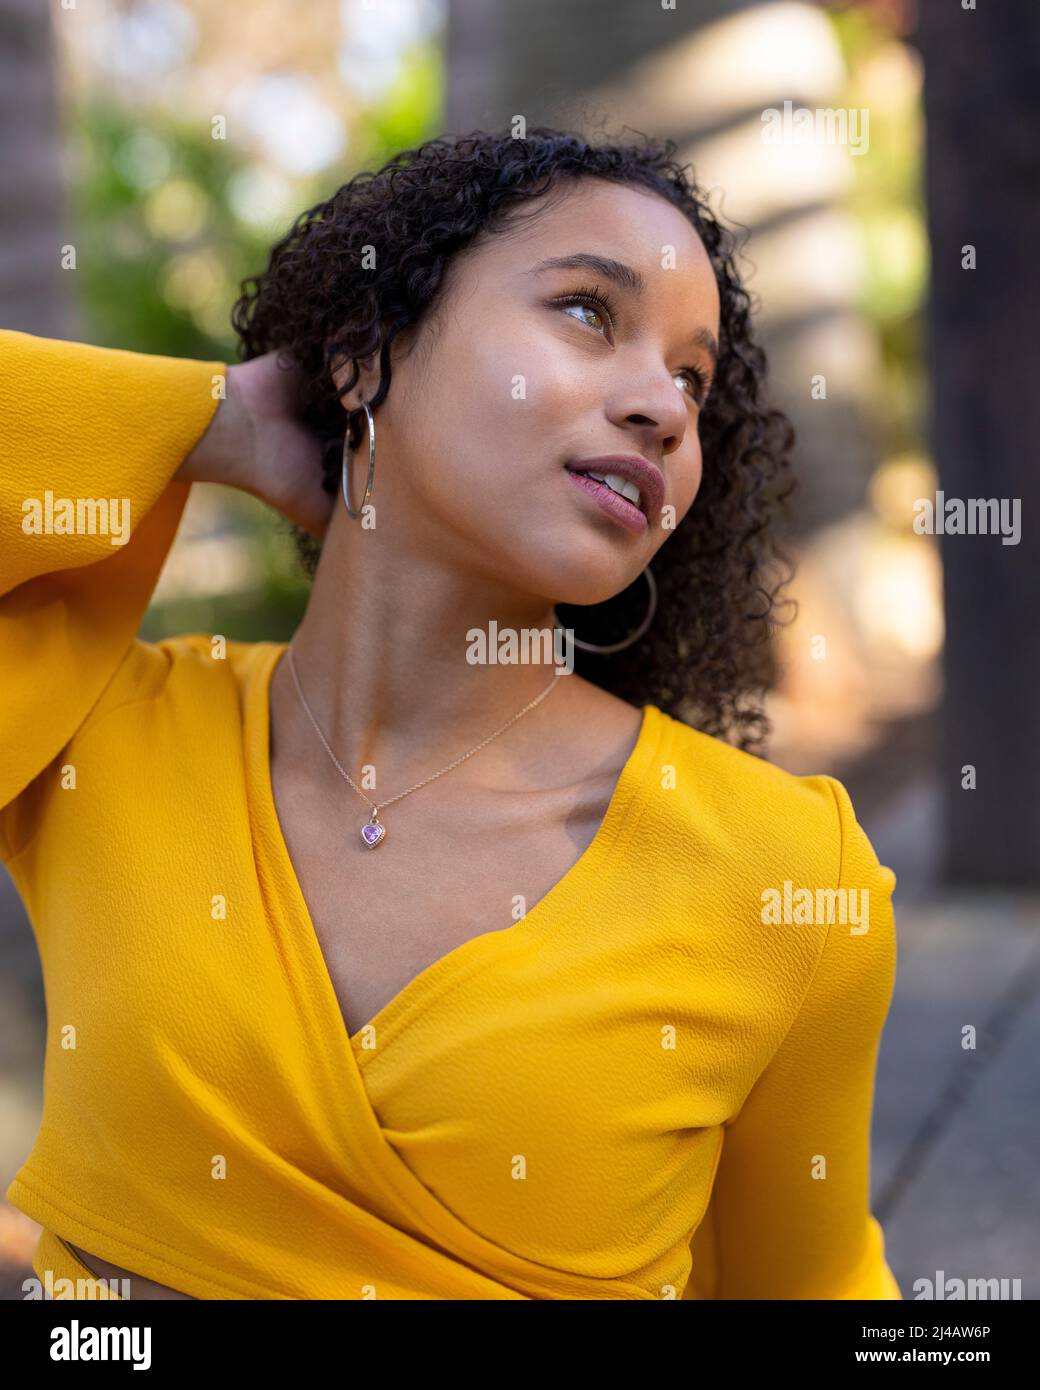 Close up portraits of a young black woman in dappled sunlight seated in a garden Stock Photo